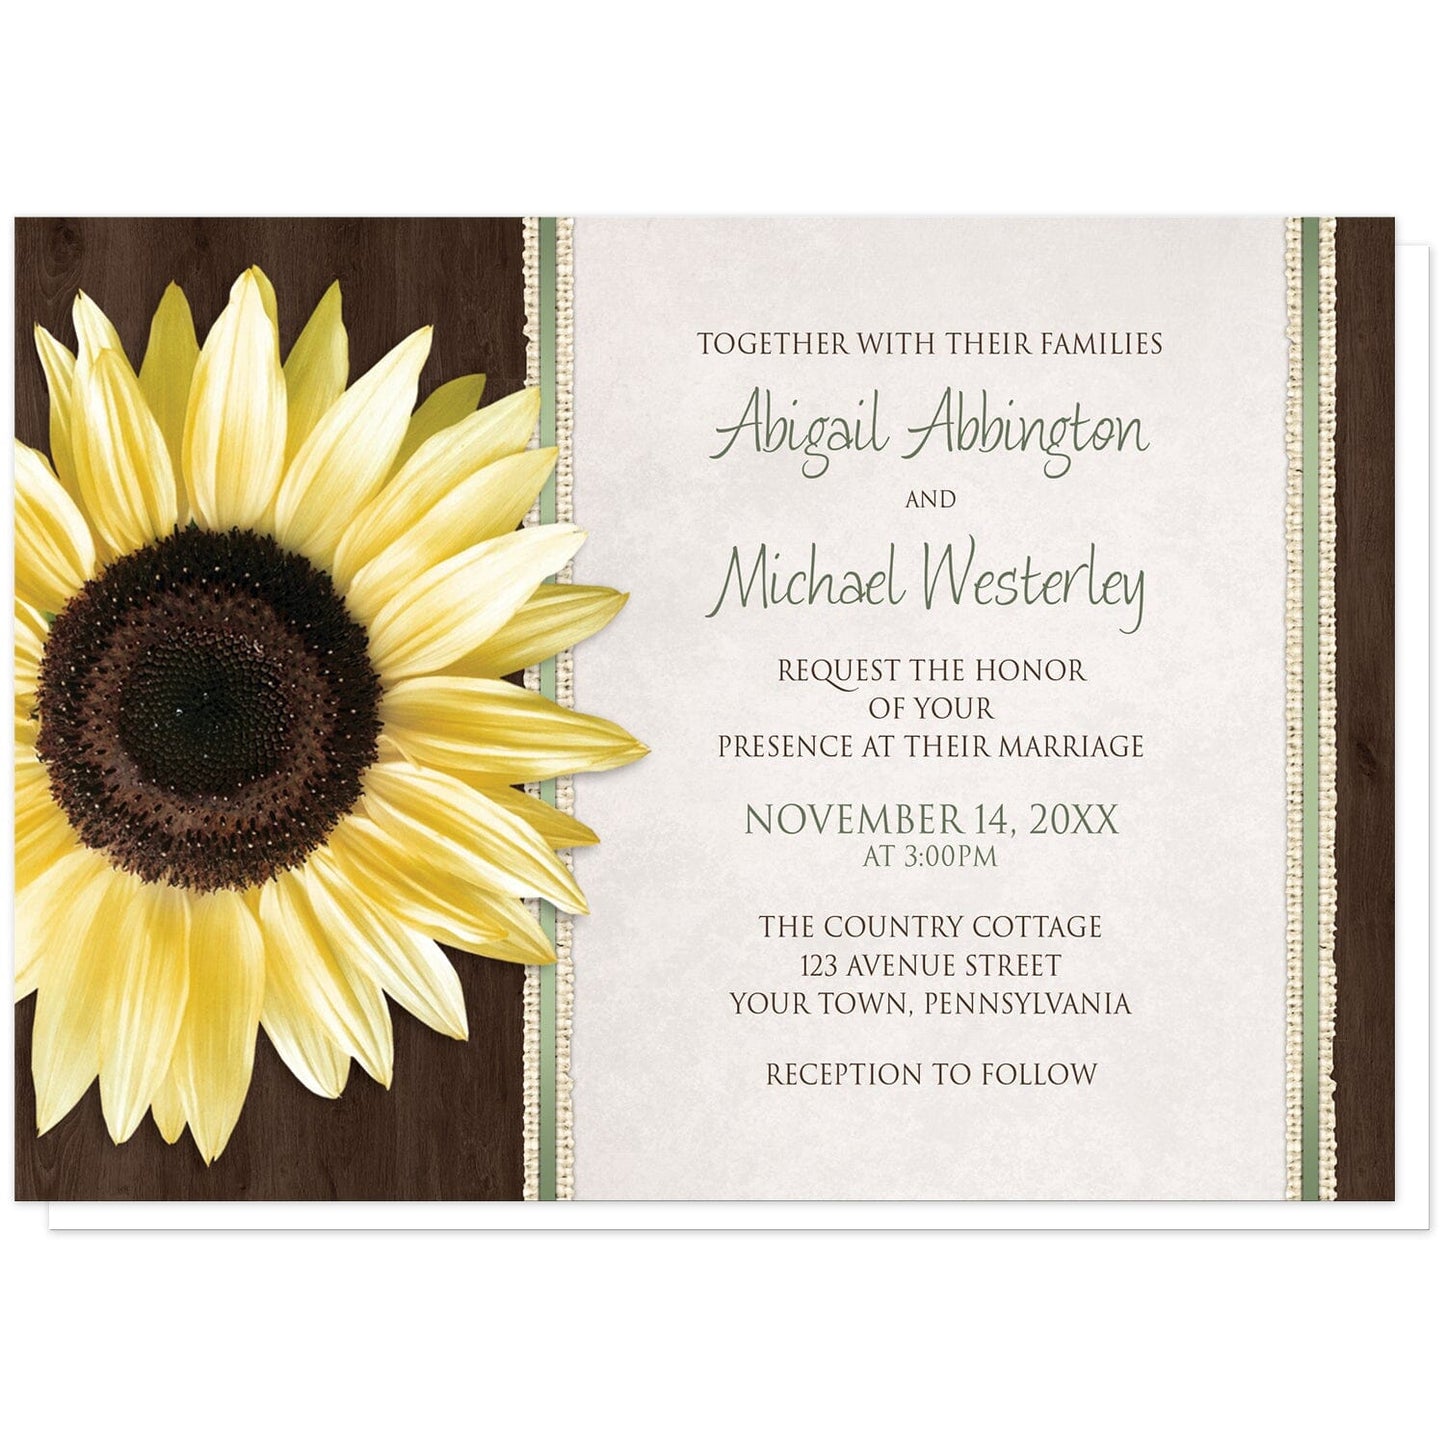 Country Sunflower Wood Brown Green Wedding Invitations at Artistically Invited. Country sunflower wood brown green wedding invitations in a floral southern style, with a big yellow sunflower over a dark brown wood pattern illustration on the left side. Your personalized marriage celebration details are custom printed in green and brown over a beige parchment design to the right of the sunflower, outlined vertically by burlap strips and green stripes.